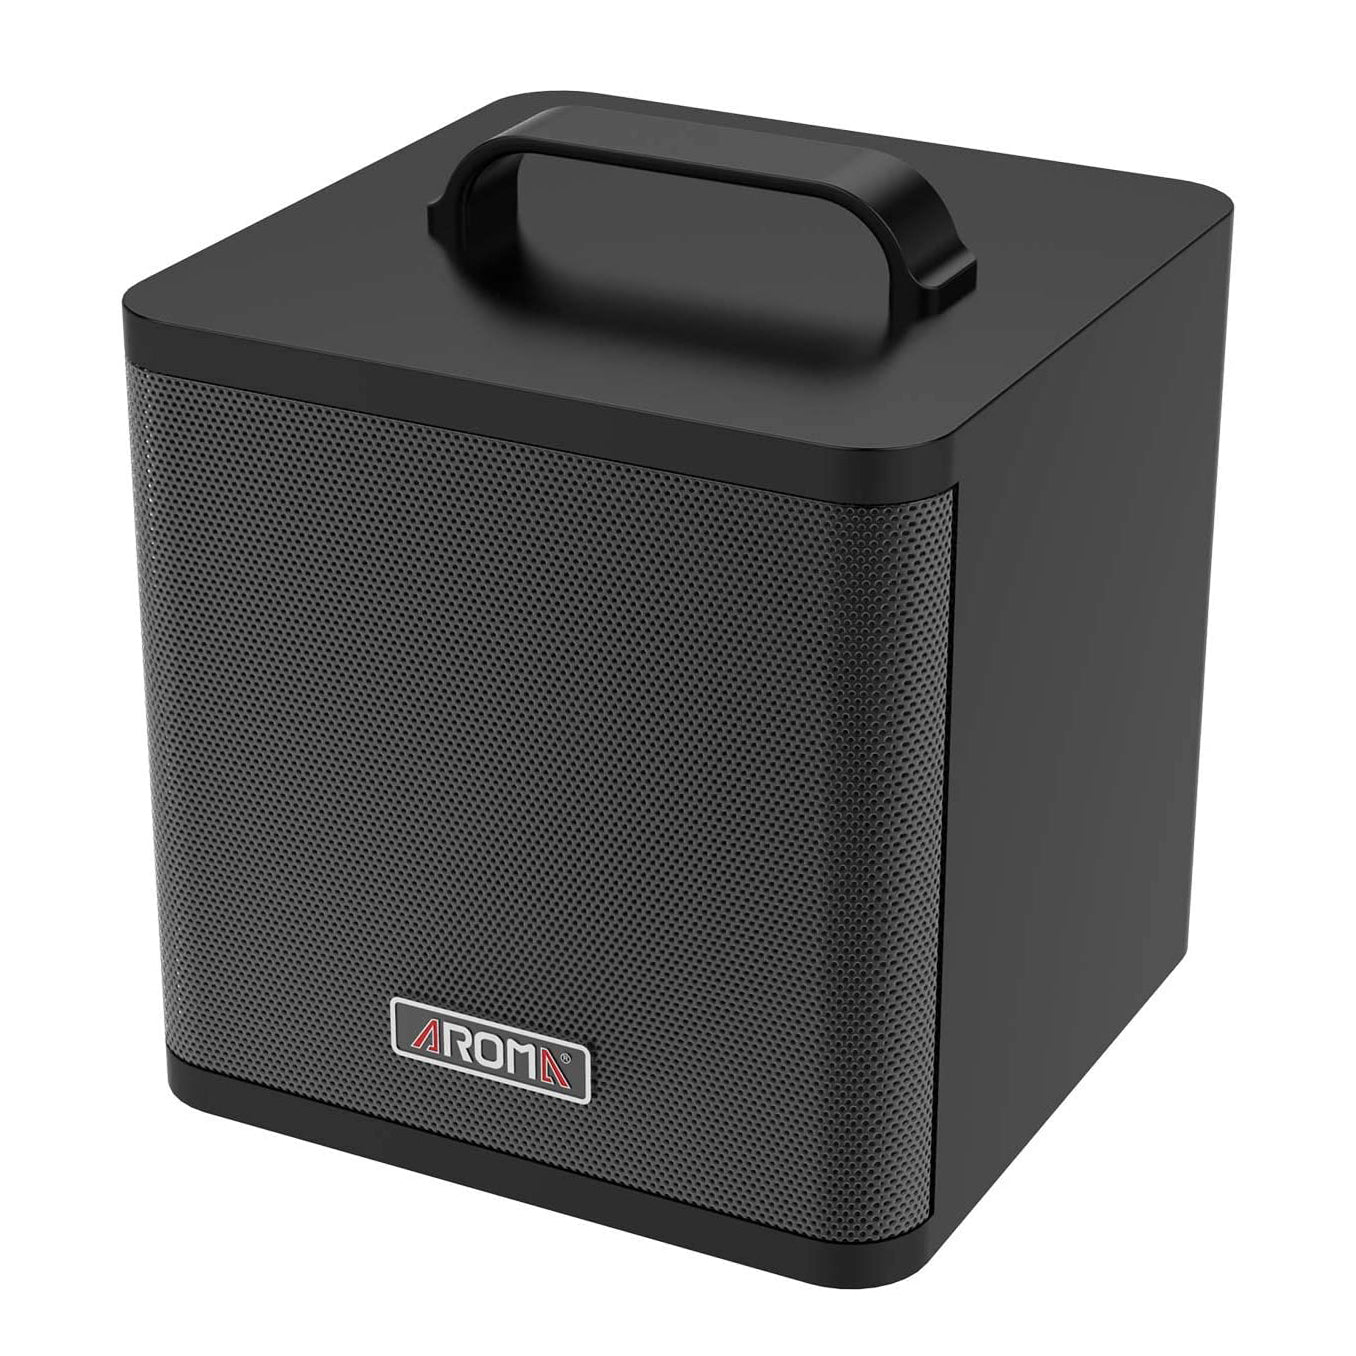 Aroma AG-40A 40W Portable Acoustic Guitar Amplifier/Micro PA or Monitor (Black) with Built-in Rechargeable Battery and Bluetooth